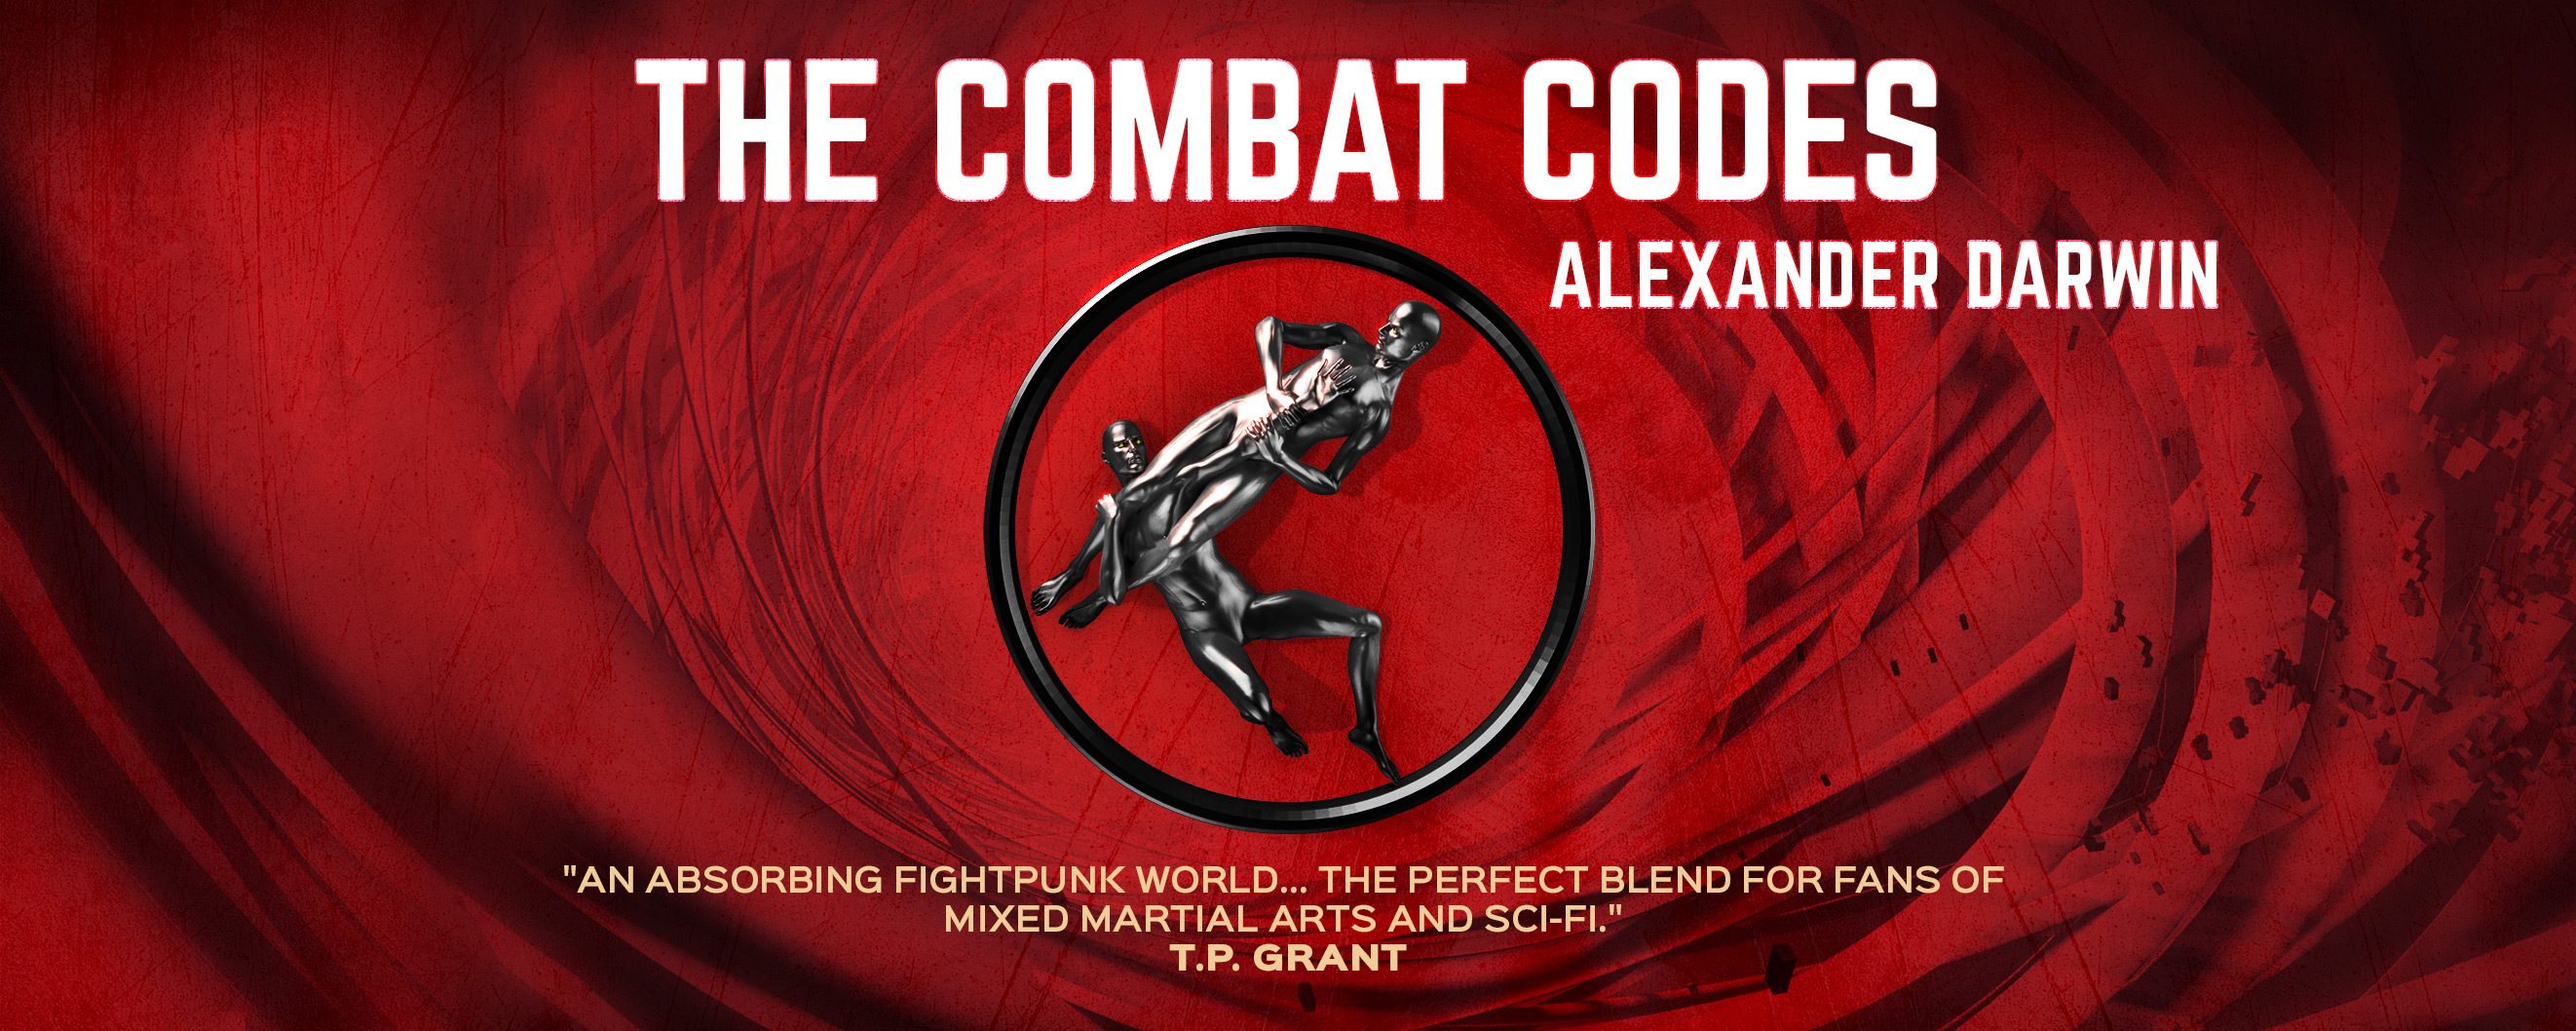 New Novel, The Combat Codes Fuses BJJ/MMA with Science Fiction